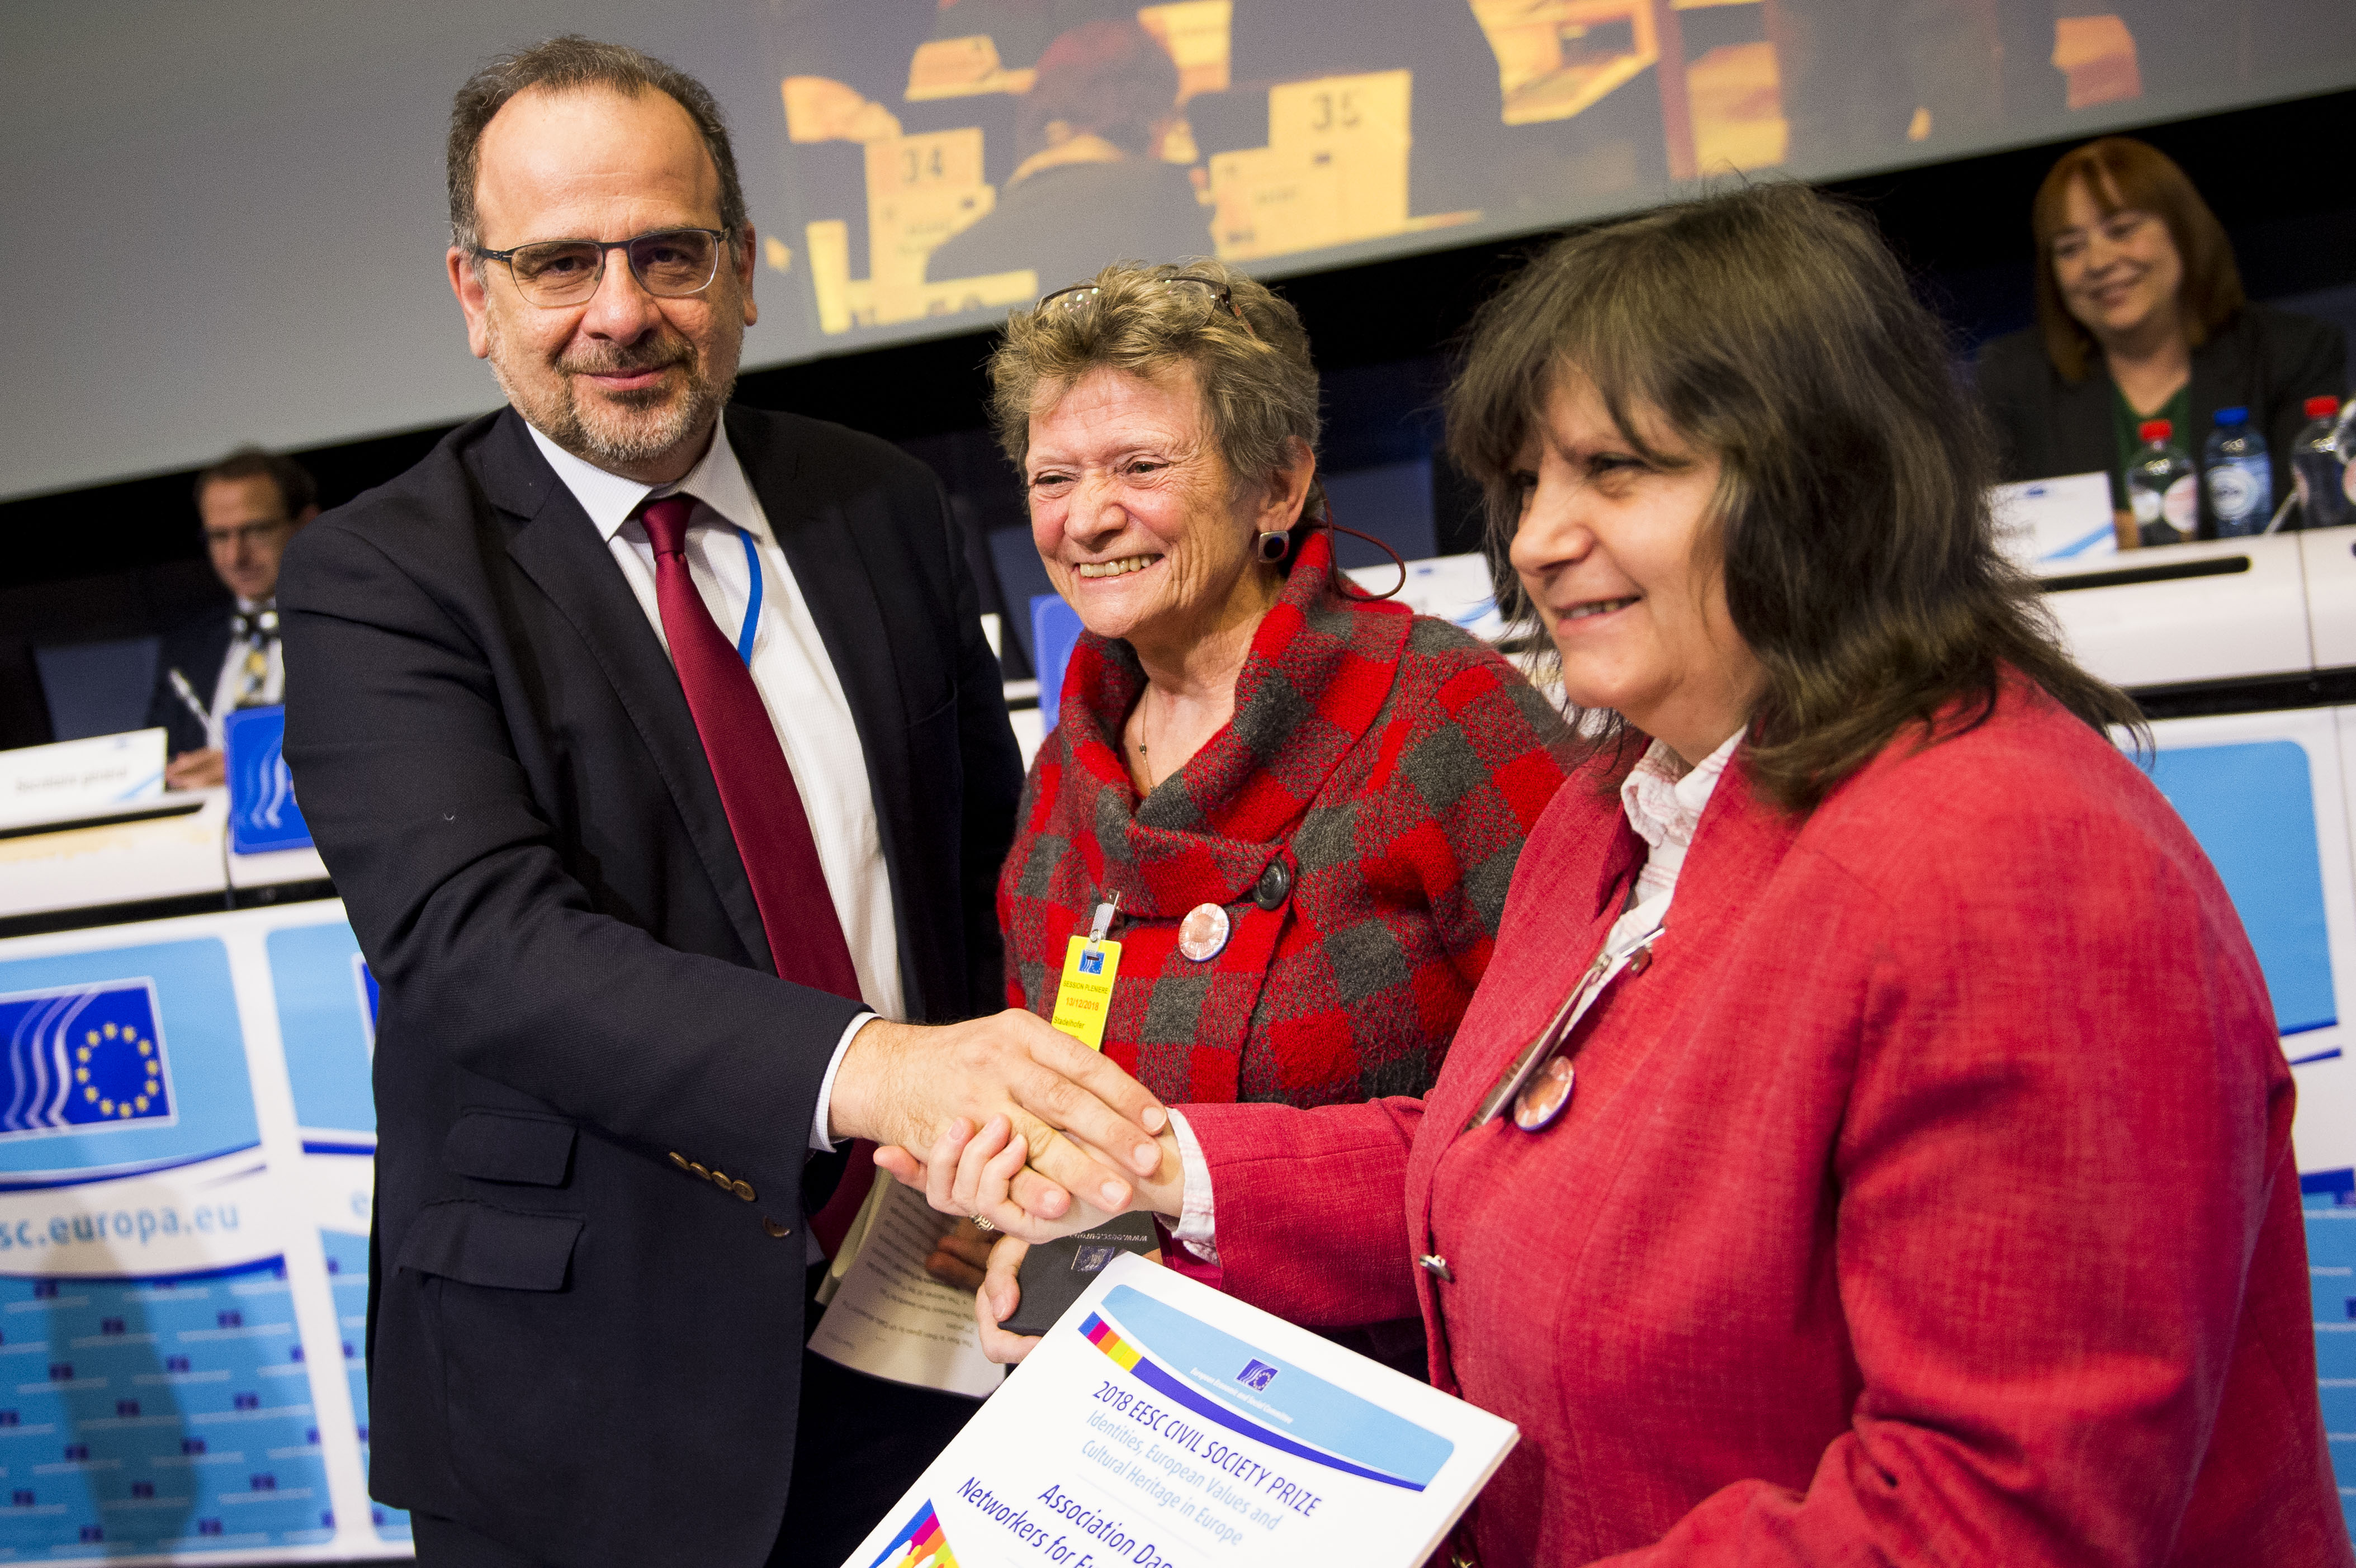 Presentation of the first prize by President Luca Jahier to Carmen Stadelhofer, Chairwoman DANET e.V., Ulm and Prof. Emilia Velikova, Vice-President, Ruse, on 13.12.2018 in Brussels